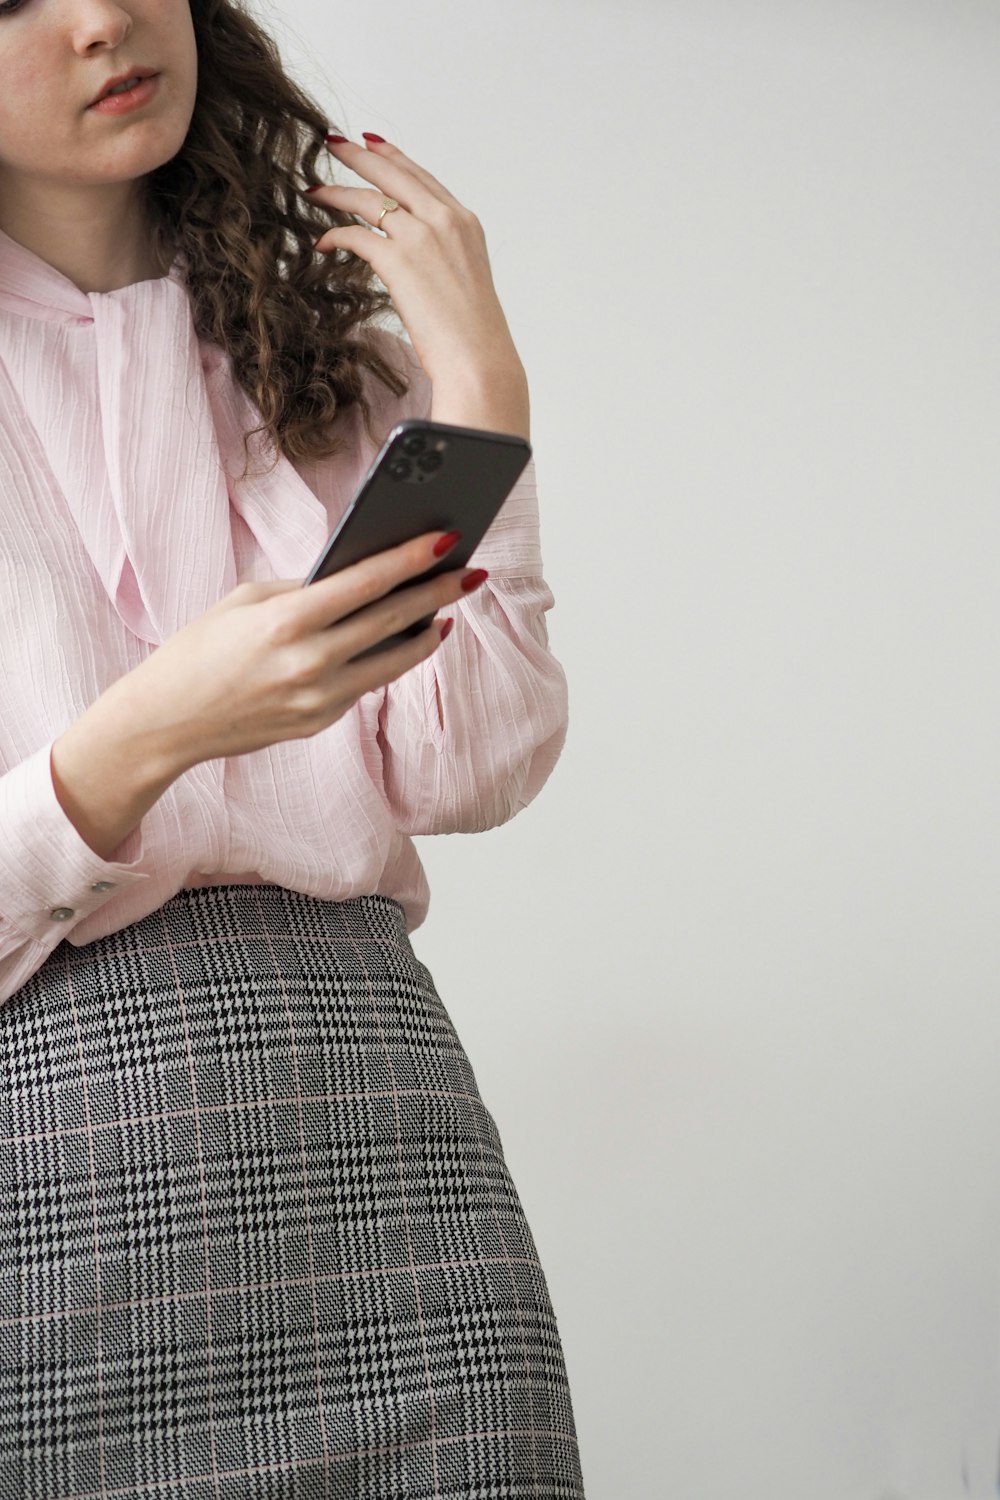 a woman in a pink shirt is holding a cell phone